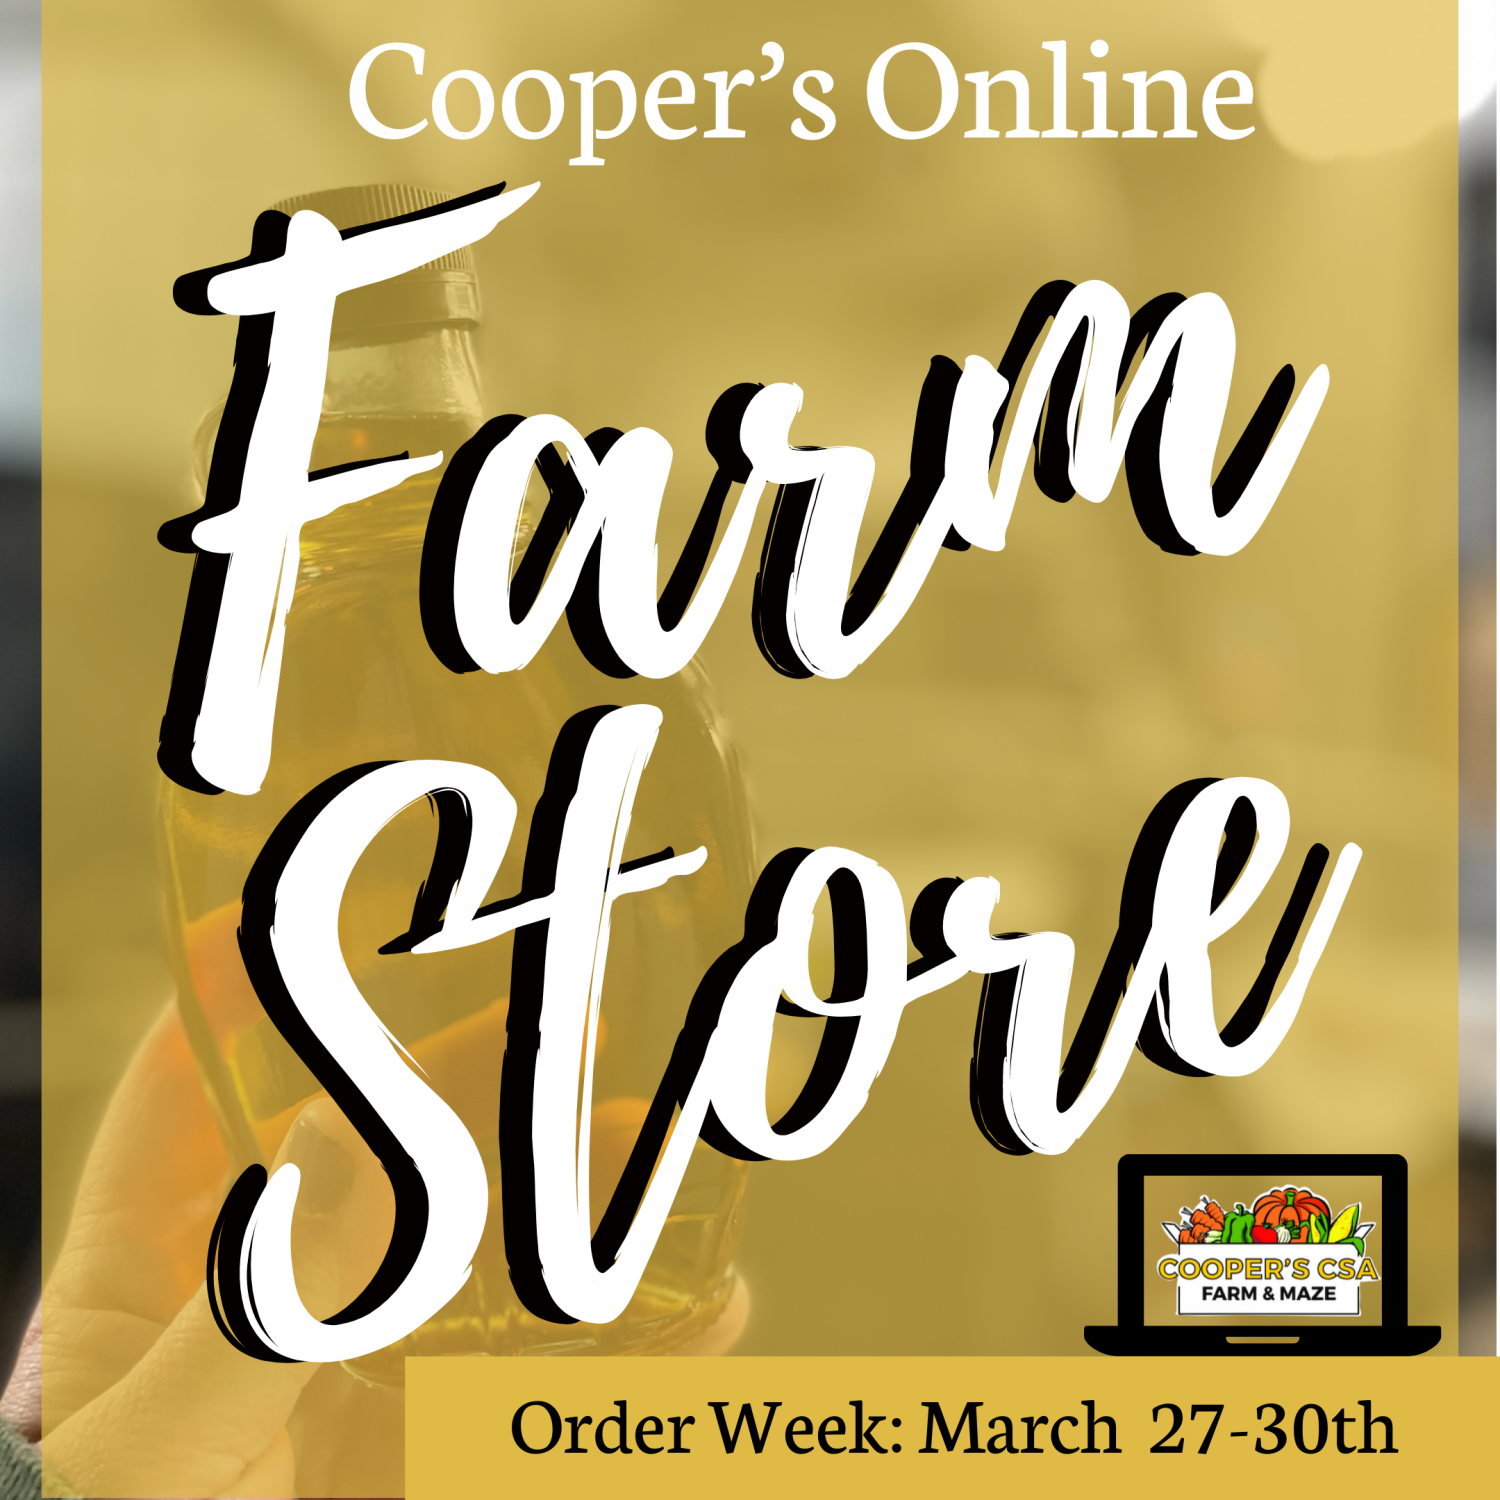 Previous Happening: Coopers Online Farm Stand- Order Week March 27-30th